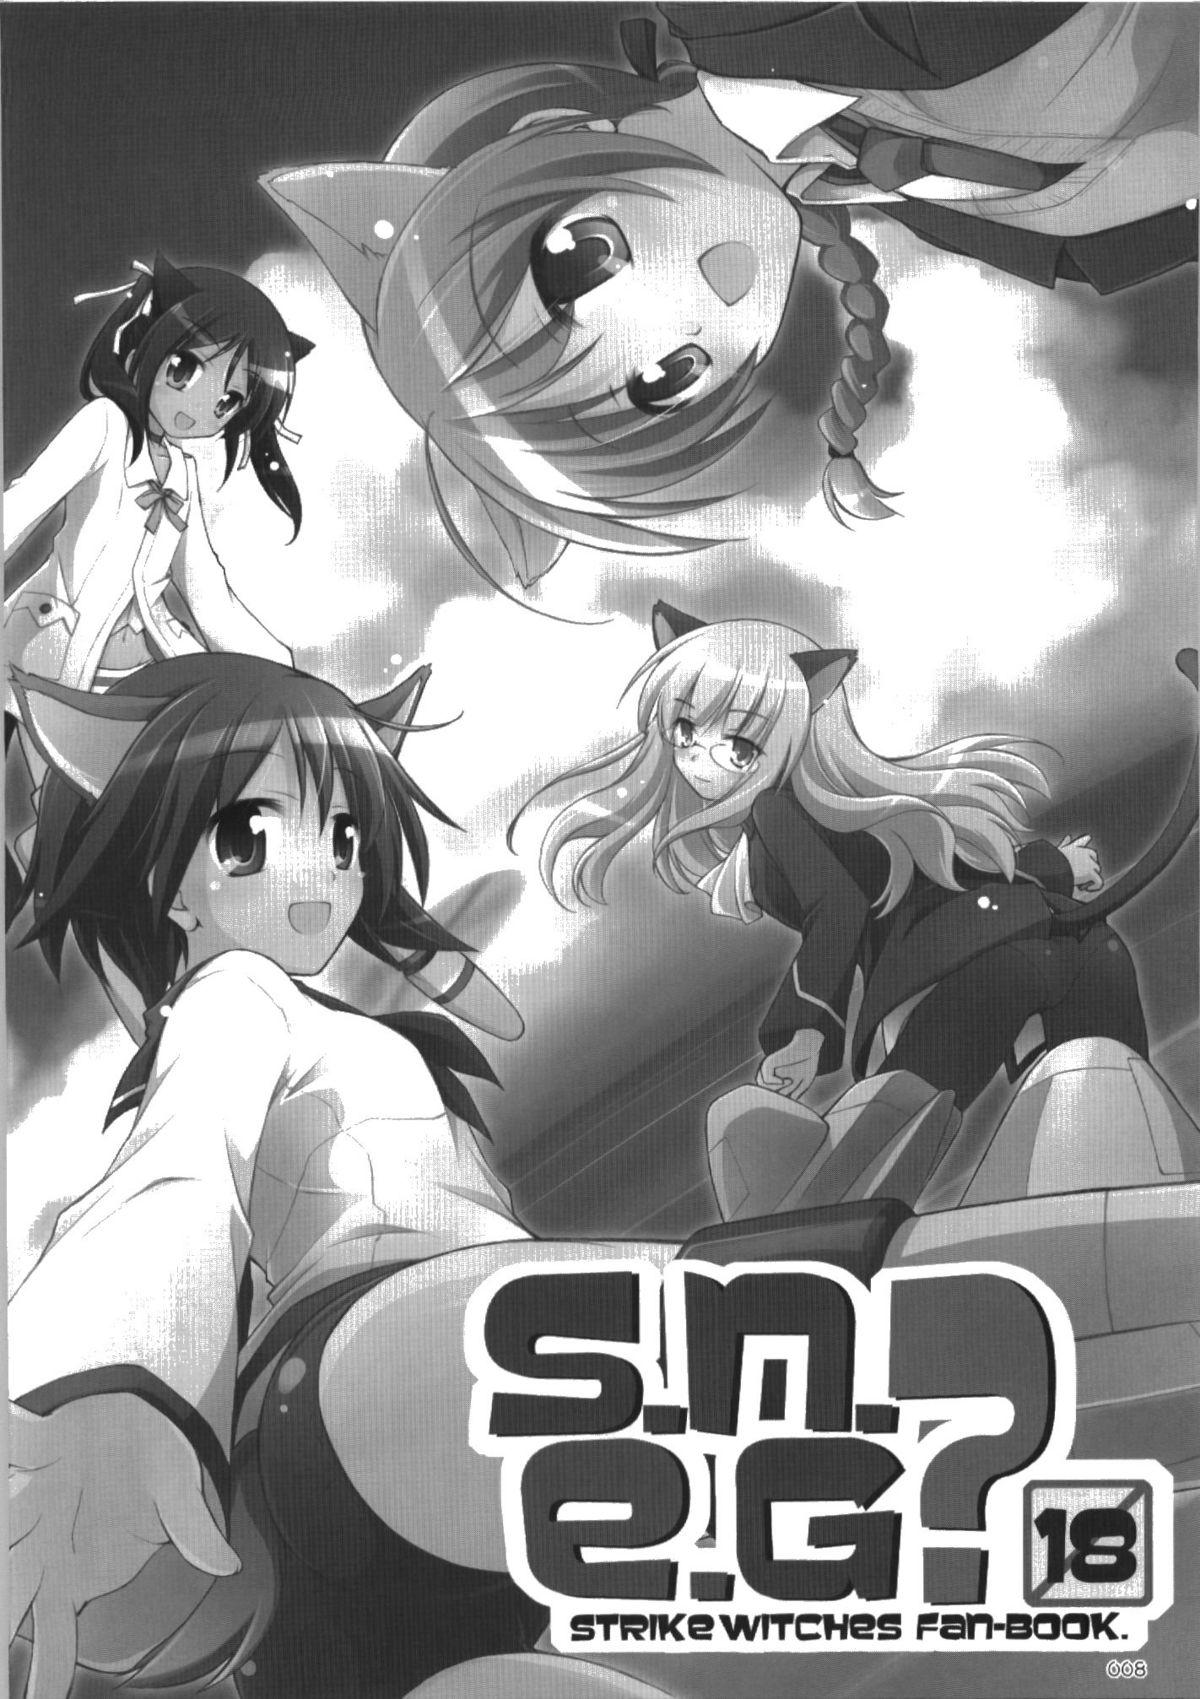 Tranny s.n.e.g? - Strike witches Squirters - Page 8